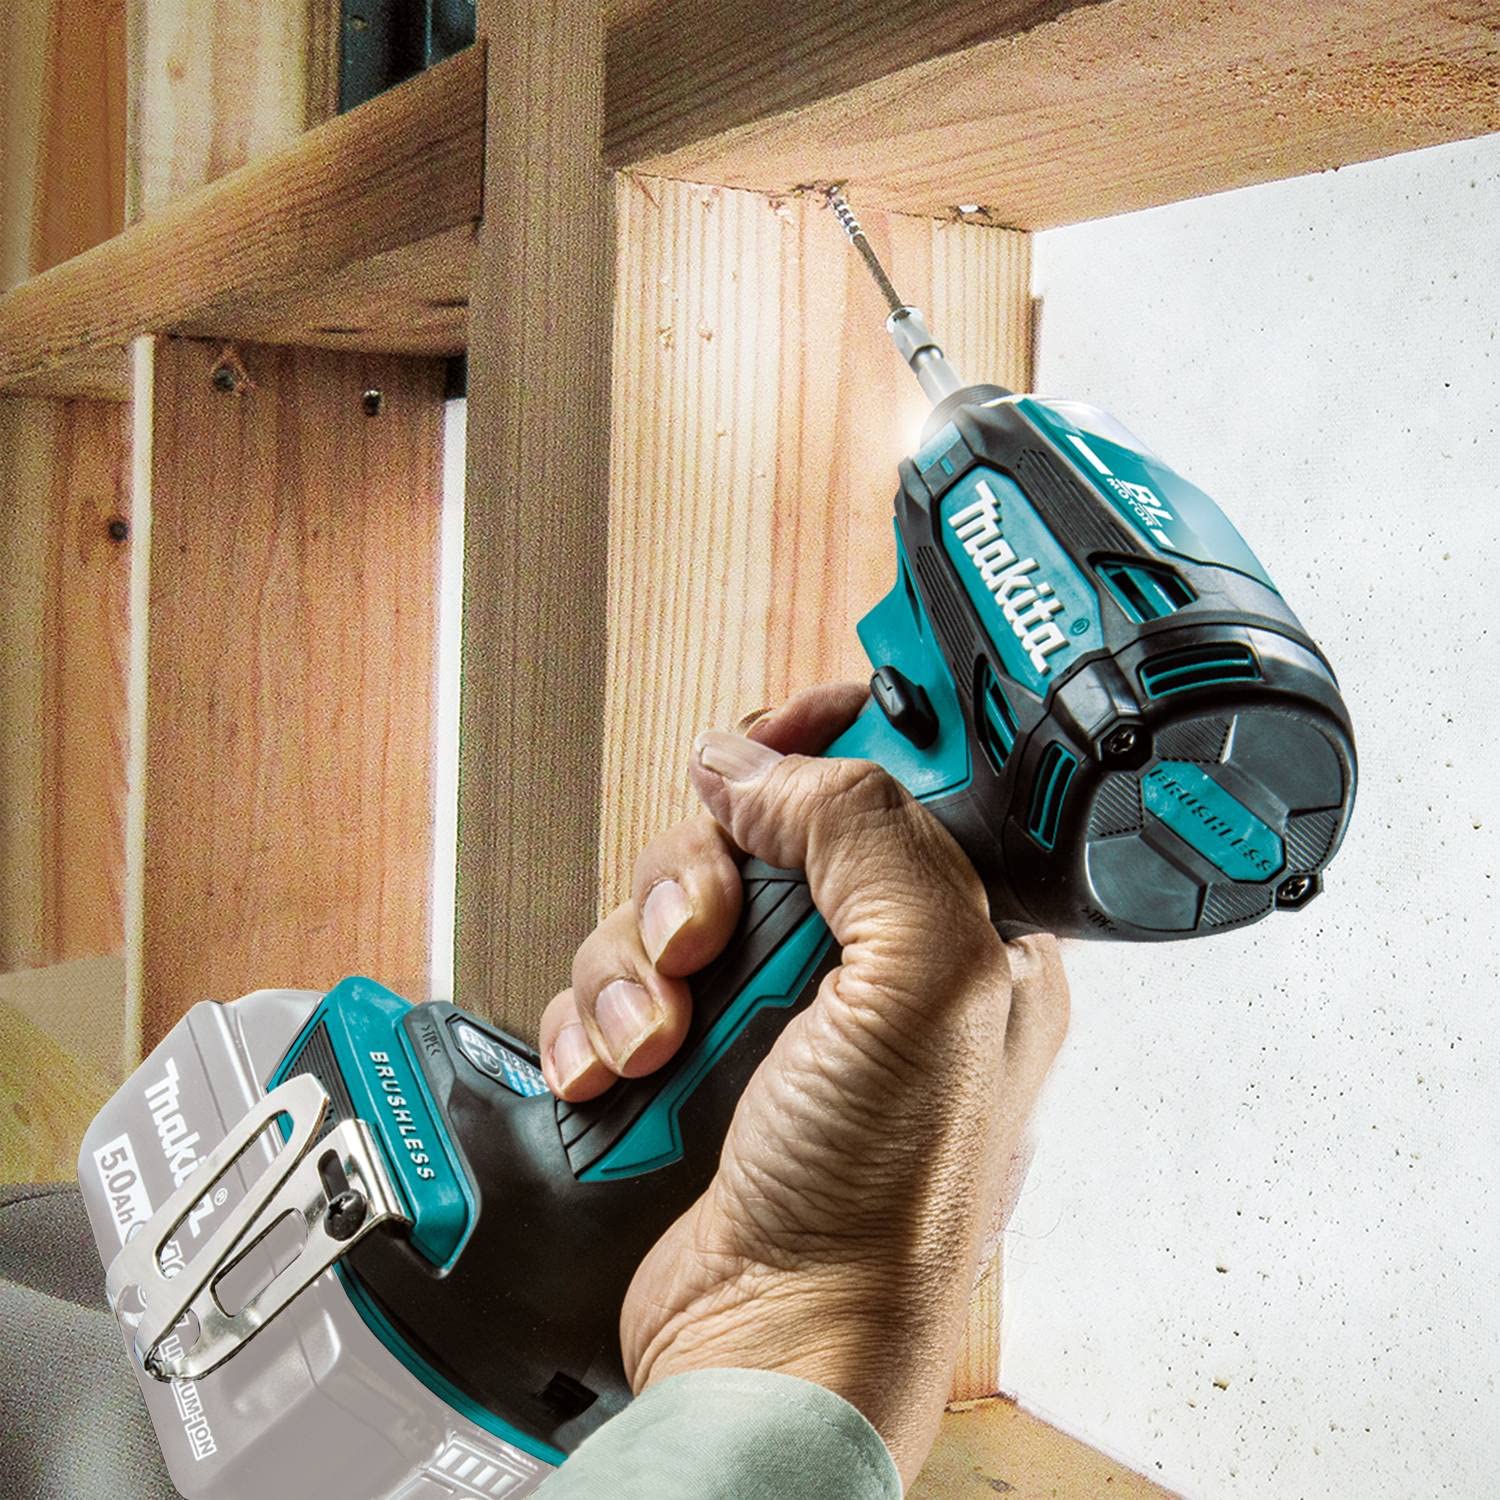 Makita XDT19Z 18V LXT® Lithium-Ion Brushless Cordless Quick-Shift Mode™ 4-Speed Impact Driver, Tool Only